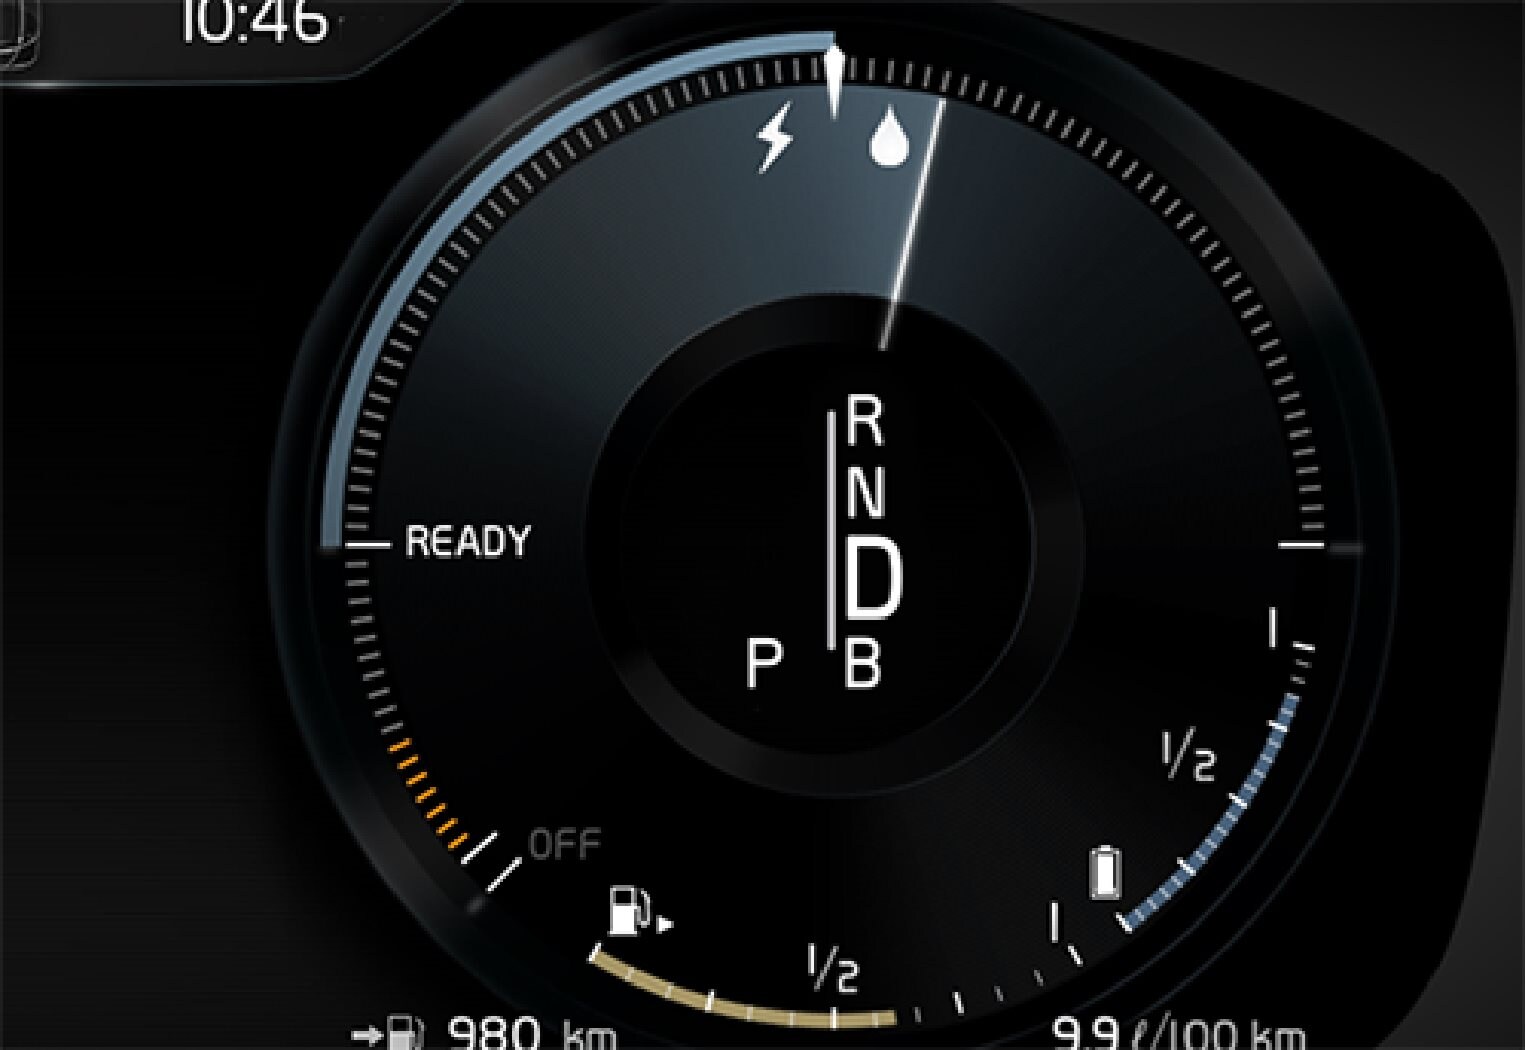 The driver display for propulsion with both the electric motor and internal combustion engine.